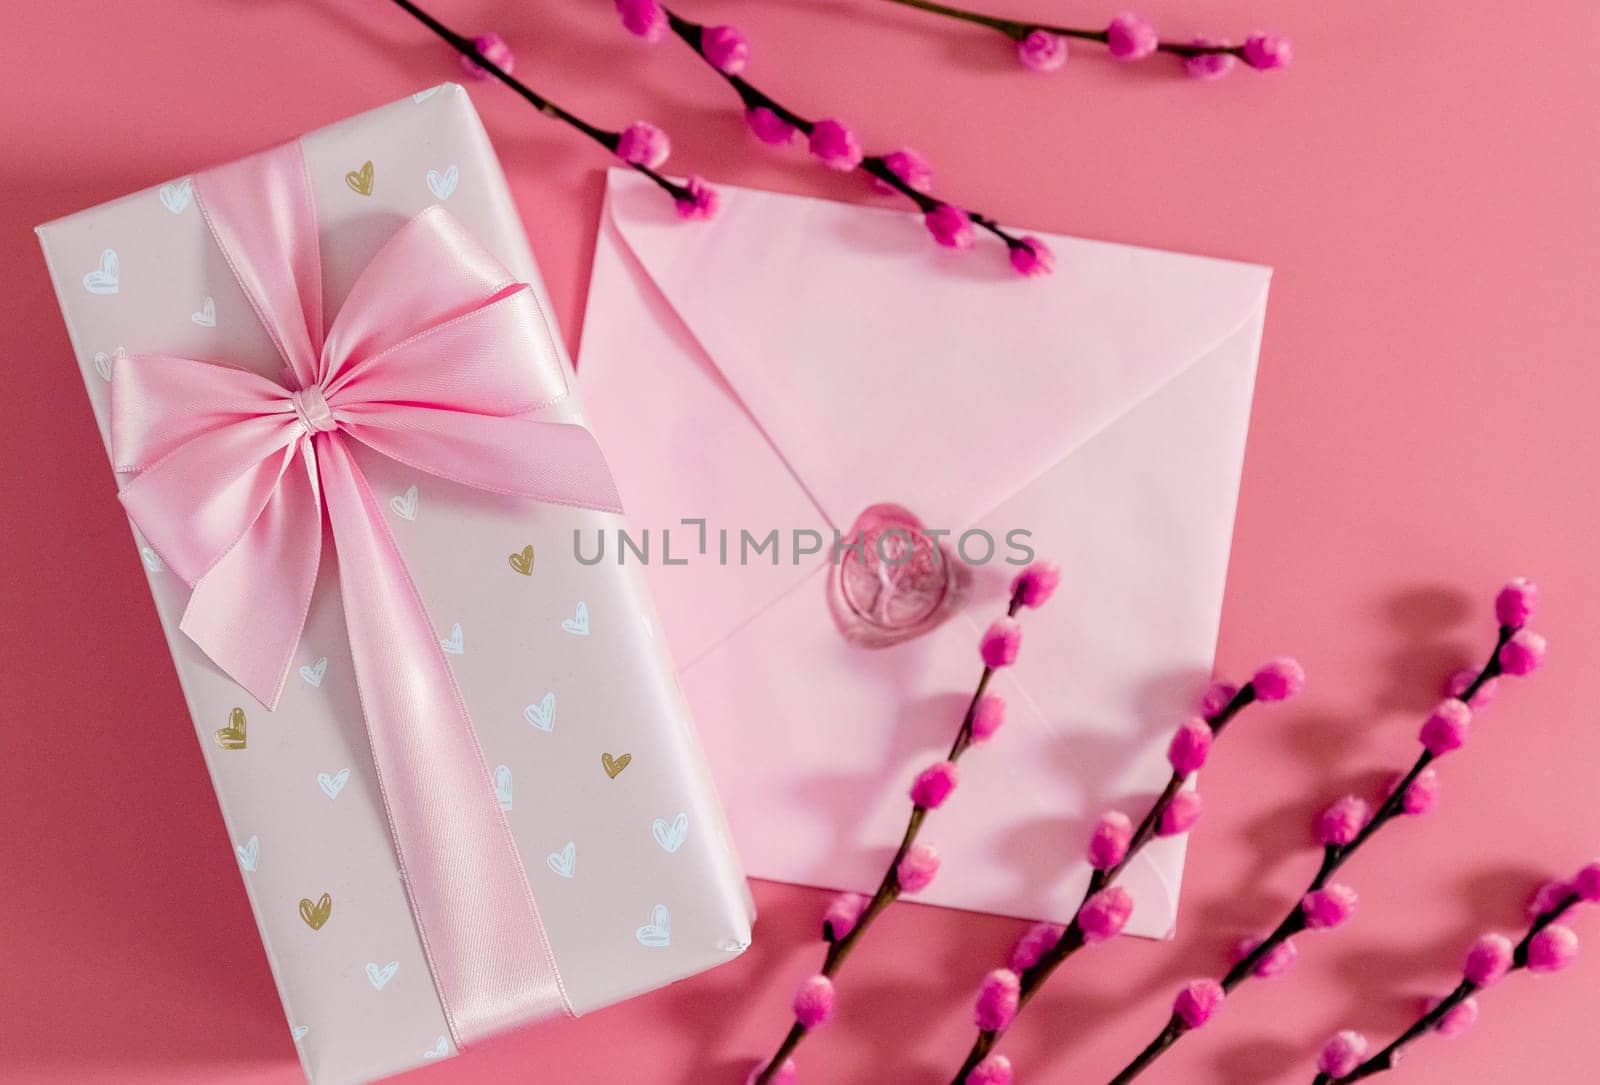 One beautiful gift box with a bow, a sealed envelope and willow branches lie on a pink background, flat lay close-up with depth of field.